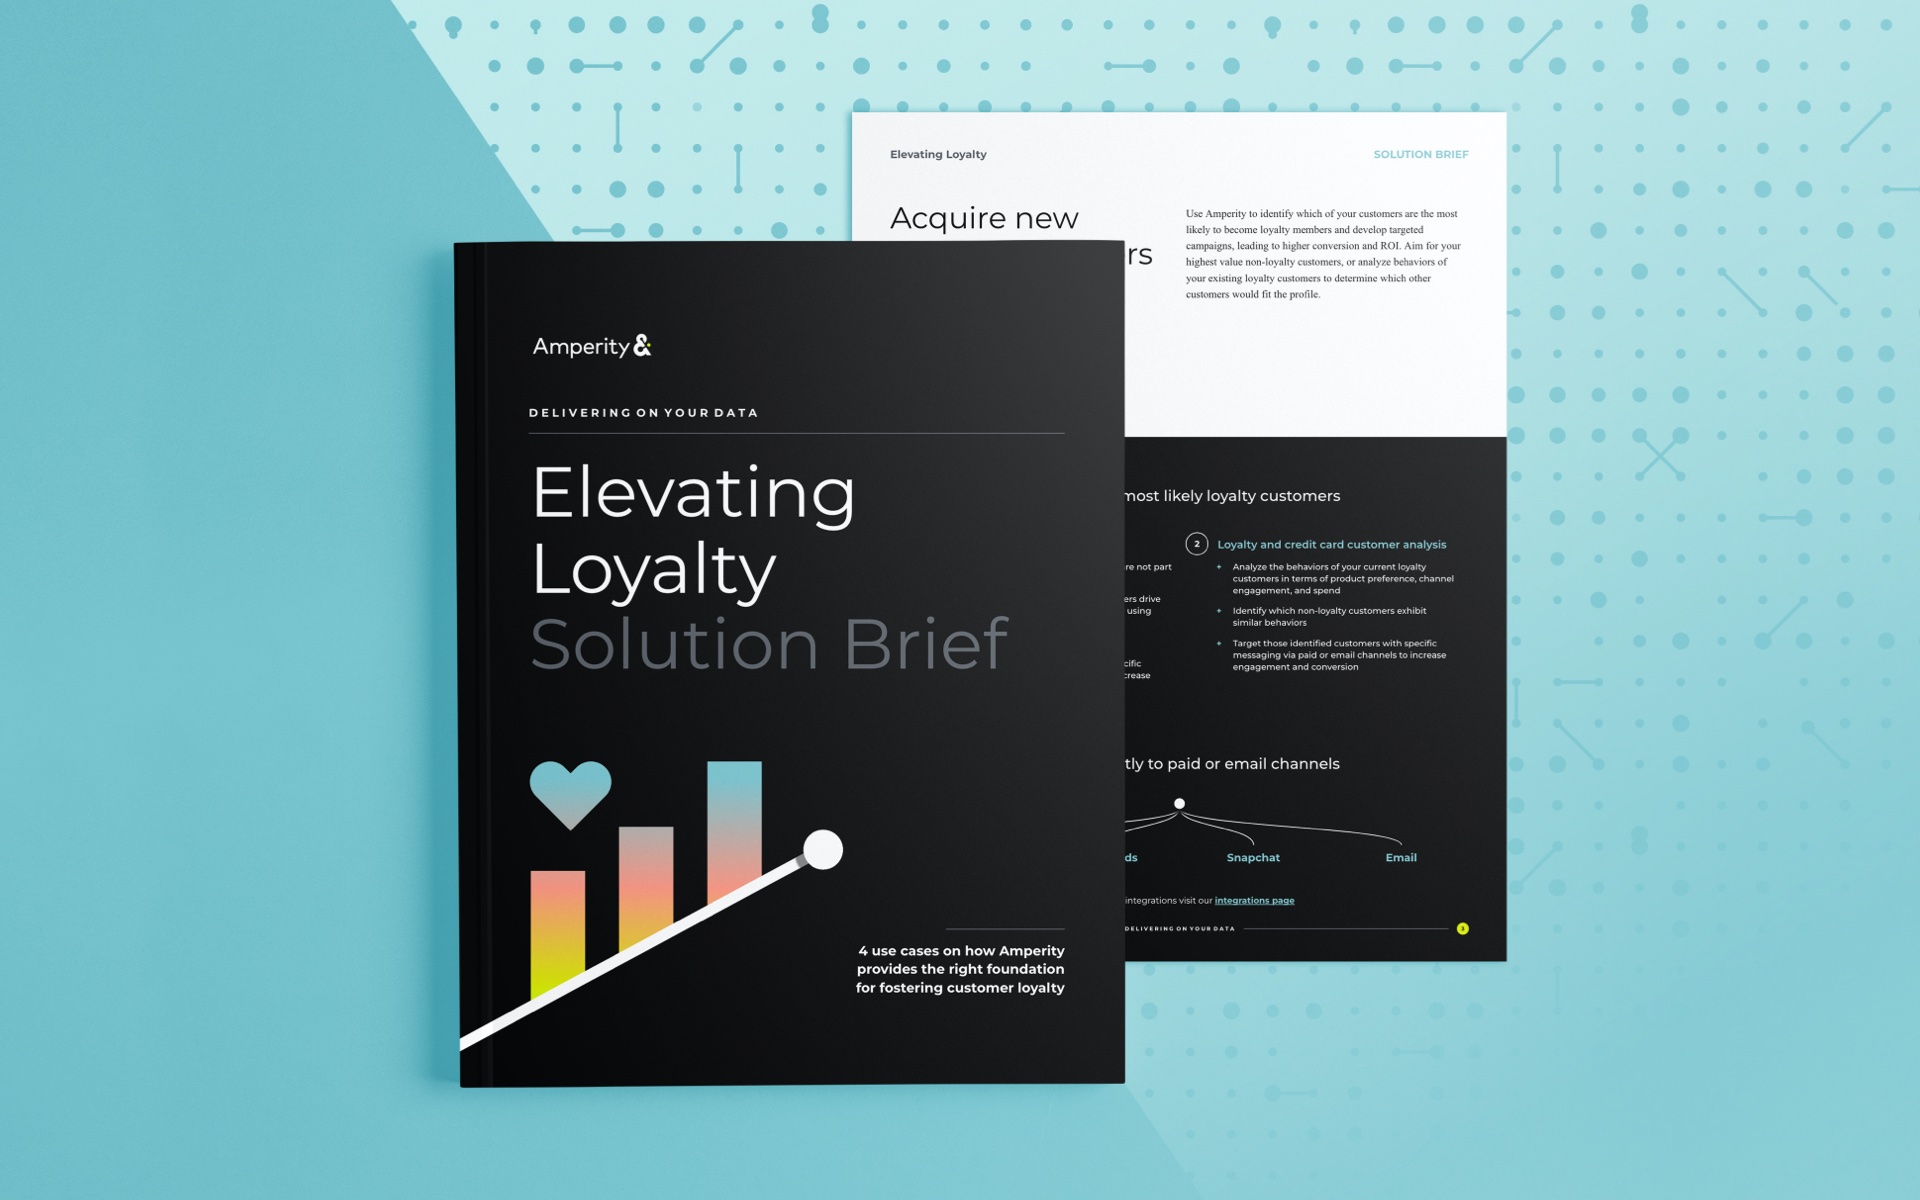 Image of front page of the elevating loyalty solution brief